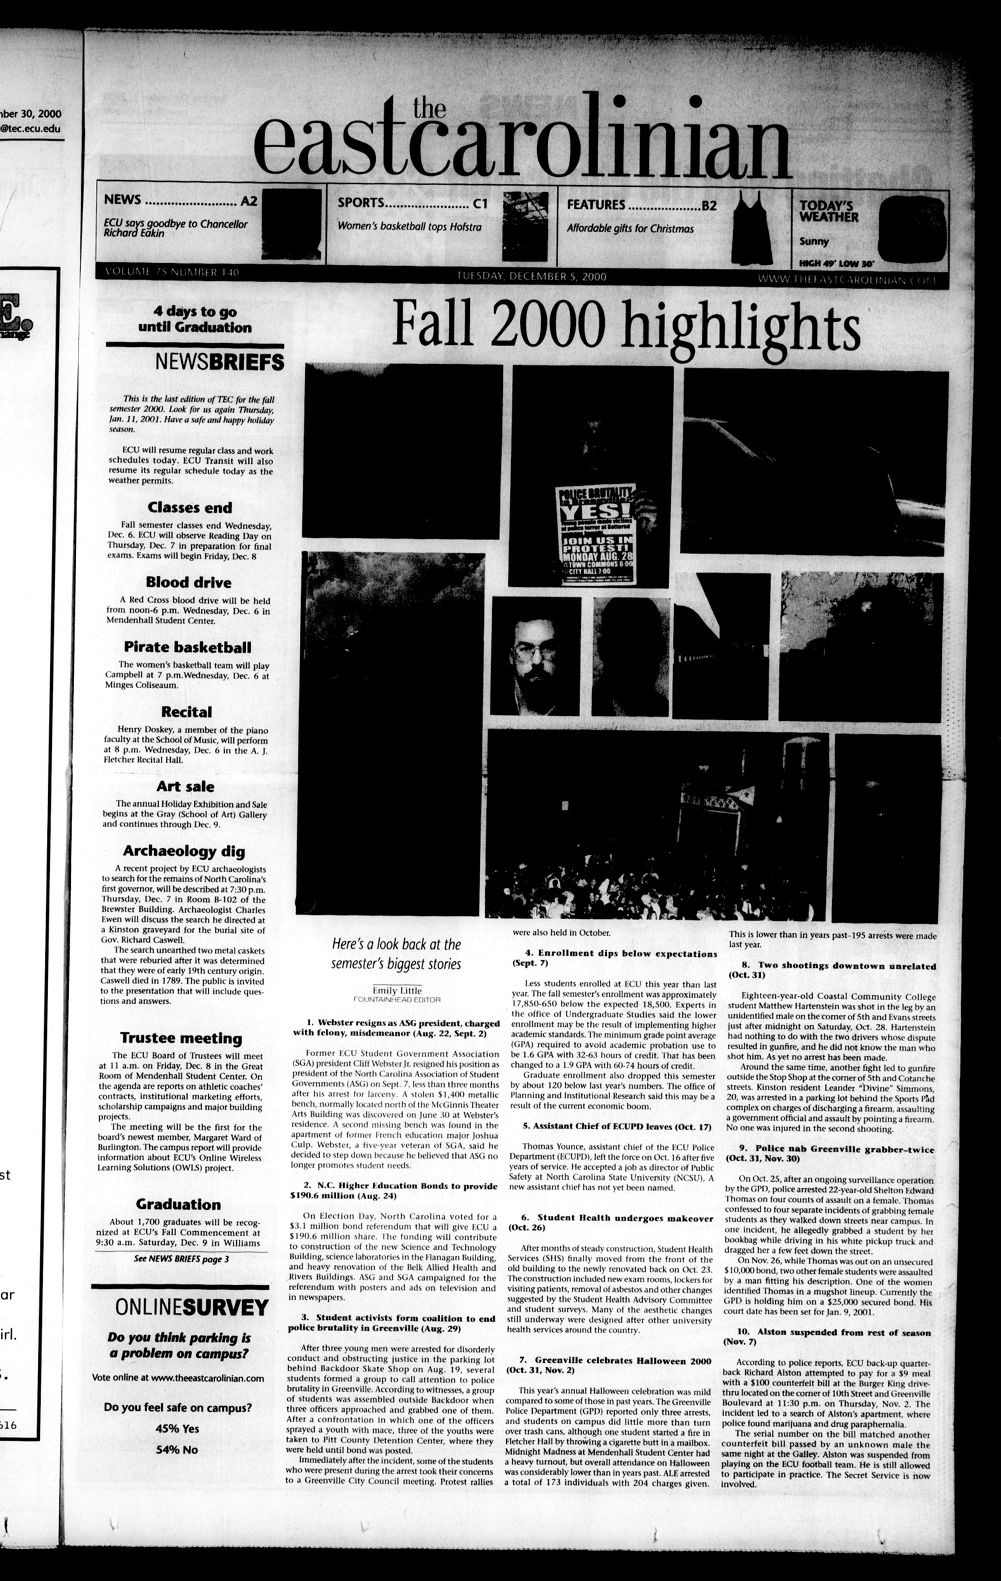 The East Carolinian, December 5, 2000 image picture